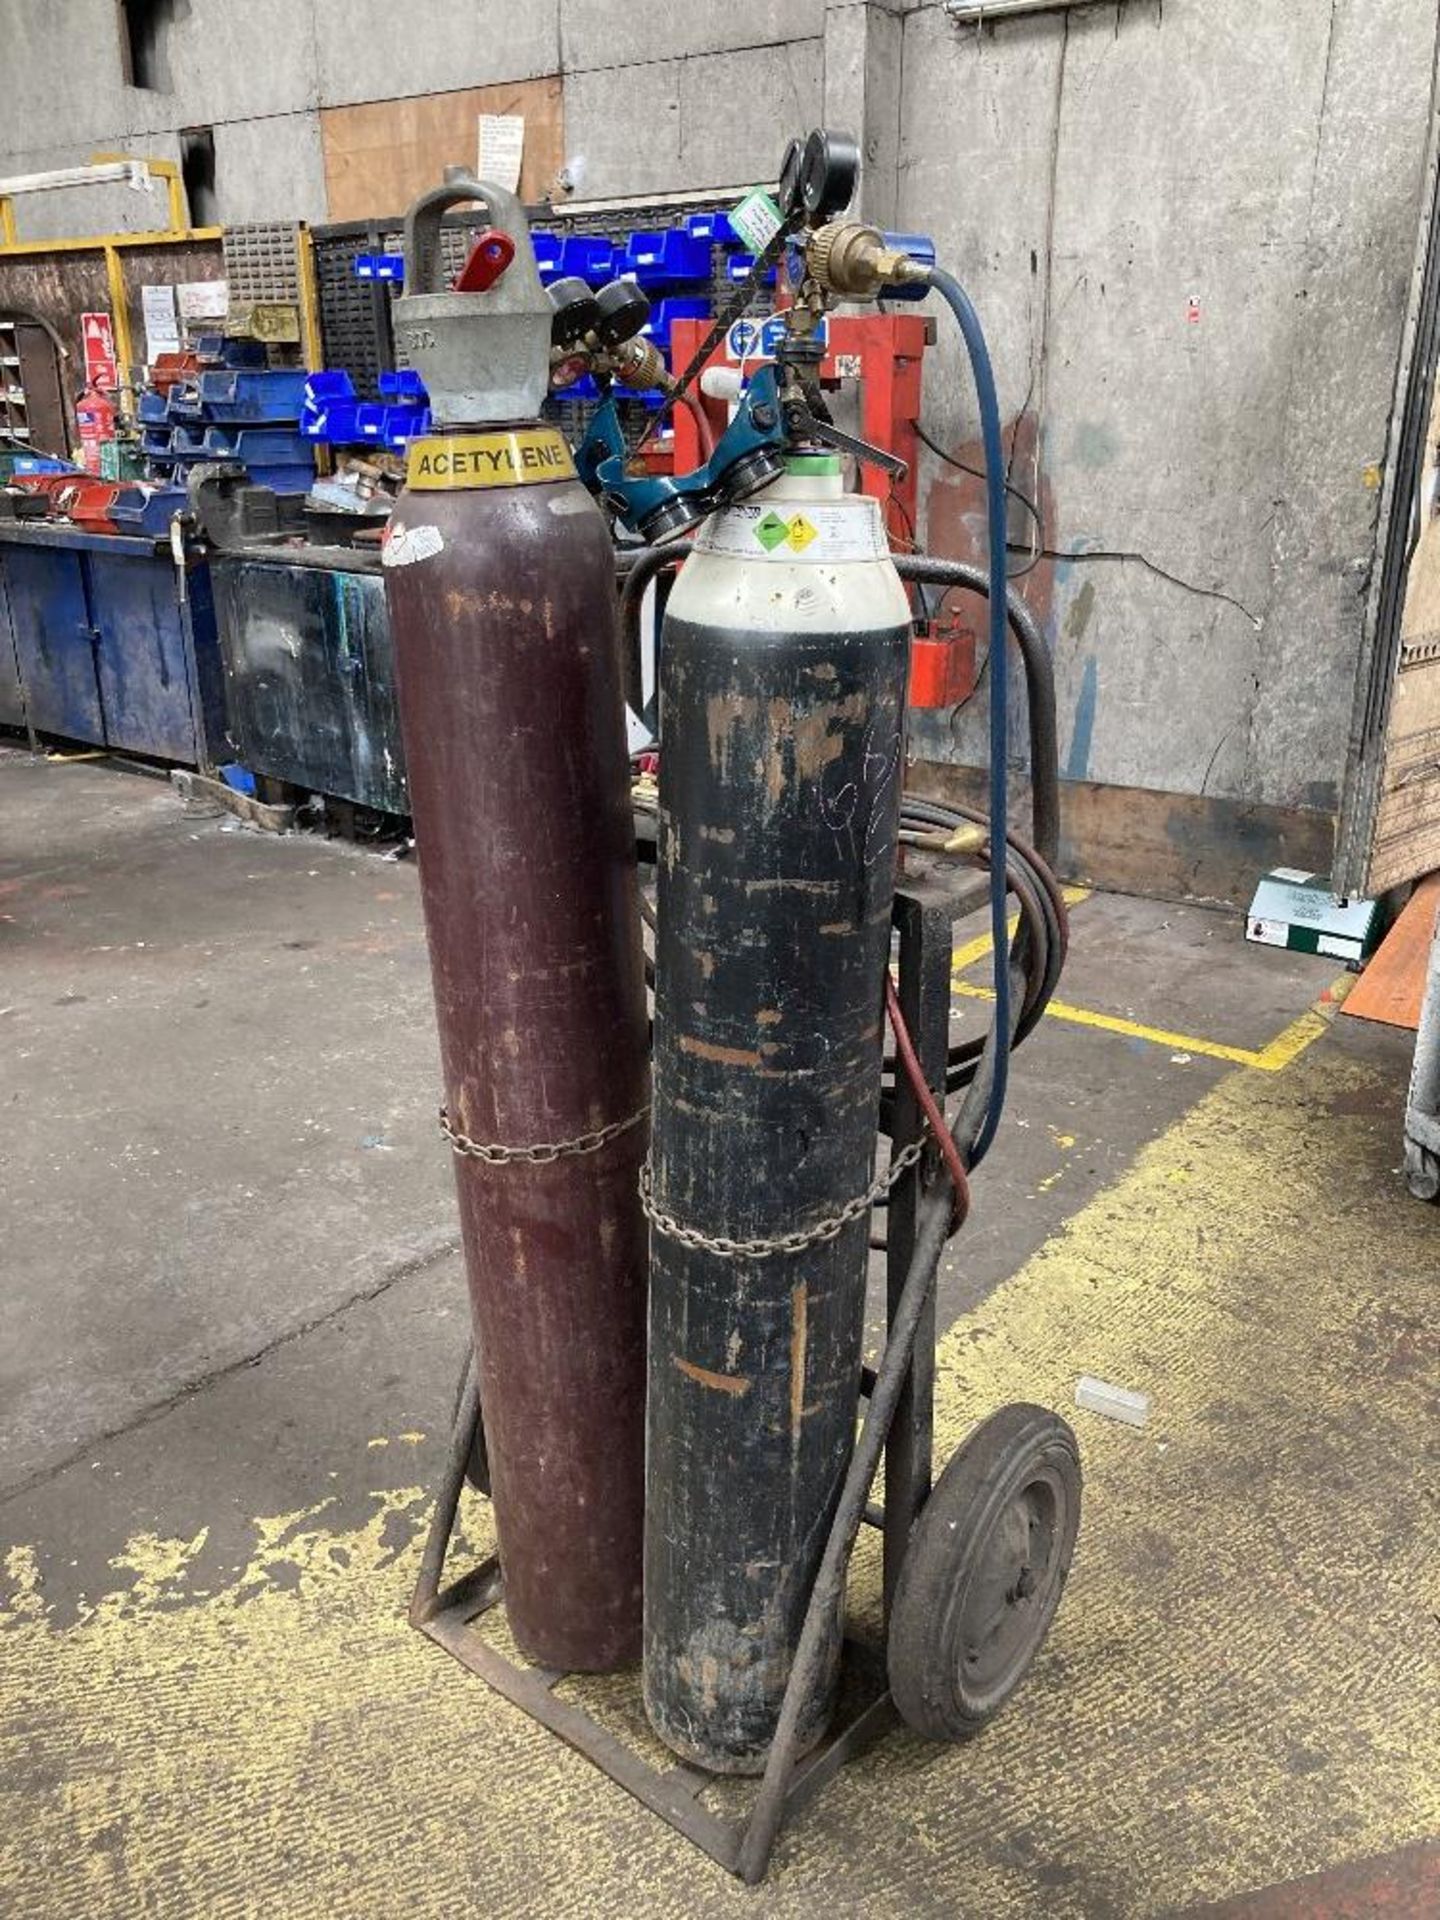 Oxyacetylene cutting torch and bottle trolley